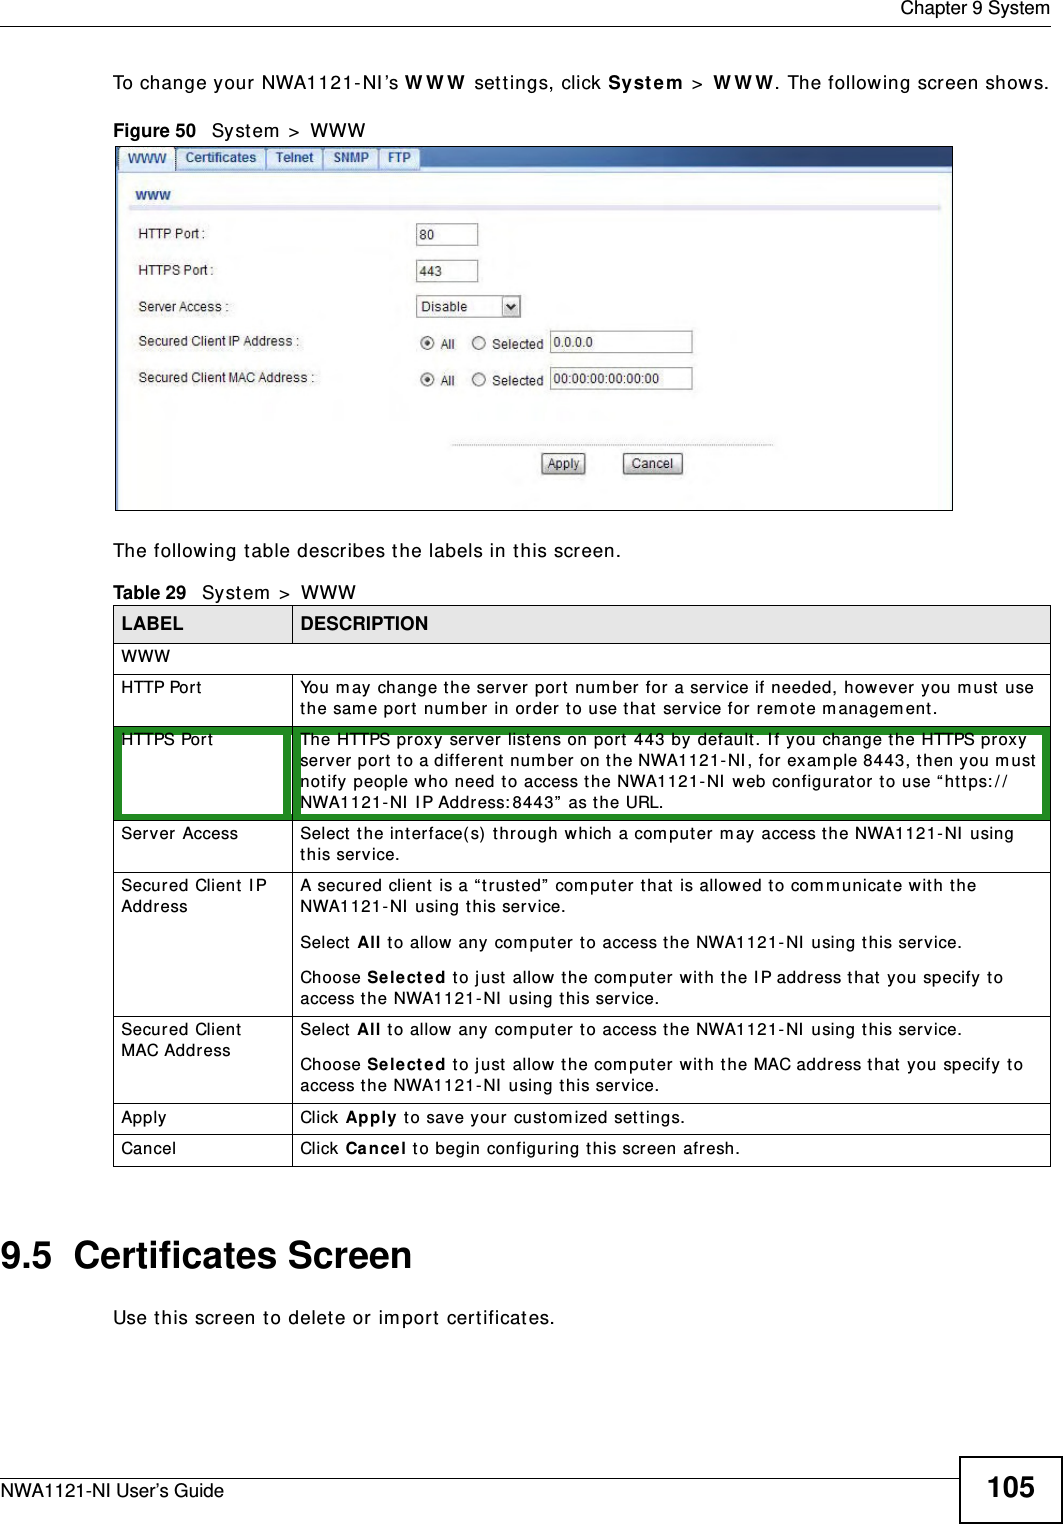  Chapter 9 SystemNWA1121-NI User’s Guide 105To change your NWA1121-NI’s WWW settings, click System &gt; WWW. The following screen shows.Figure 50   System &gt; WWWThe following table describes the labels in this screen.9.5  Certificates ScreenUse this screen to delete or import certificates.Table 29   System &gt; WWWLABEL DESCRIPTIONWWWHTTP Port You may change the server port number for a service if needed, however you must use the same port number in order to use that service for remote management.HTTPS Port The HTTPS proxy server listens on port 443 by default. If you change the HTTPS proxy server port to a different number on the NWA1121-NI, for example 8443, then you must notify people who need to access the NWA1121-NI web configurator to use “https://NWA1121-NI IP Address:8443” as the URL.Server Access Select the interface(s) through which a computer may access the NWA1121-NI using this service.Secured Client IP Address A secured client is a “trusted” computer that is allowed to communicate with the NWA1121-NI using this service. Select All to allow any computer to access the NWA1121-NI using this service.Choose Selected to just allow the computer with the IP address that you specify to access the NWA1121-NI using this service.Secured Client MAC Address Select All to allow any computer to access the NWA1121-NI using this service.Choose Selected to just allow the computer with the MAC address that you specify to access the NWA1121-NI using this service.Apply Click Apply to save your customized settings. Cancel Click Cancel to begin configuring this screen afresh.